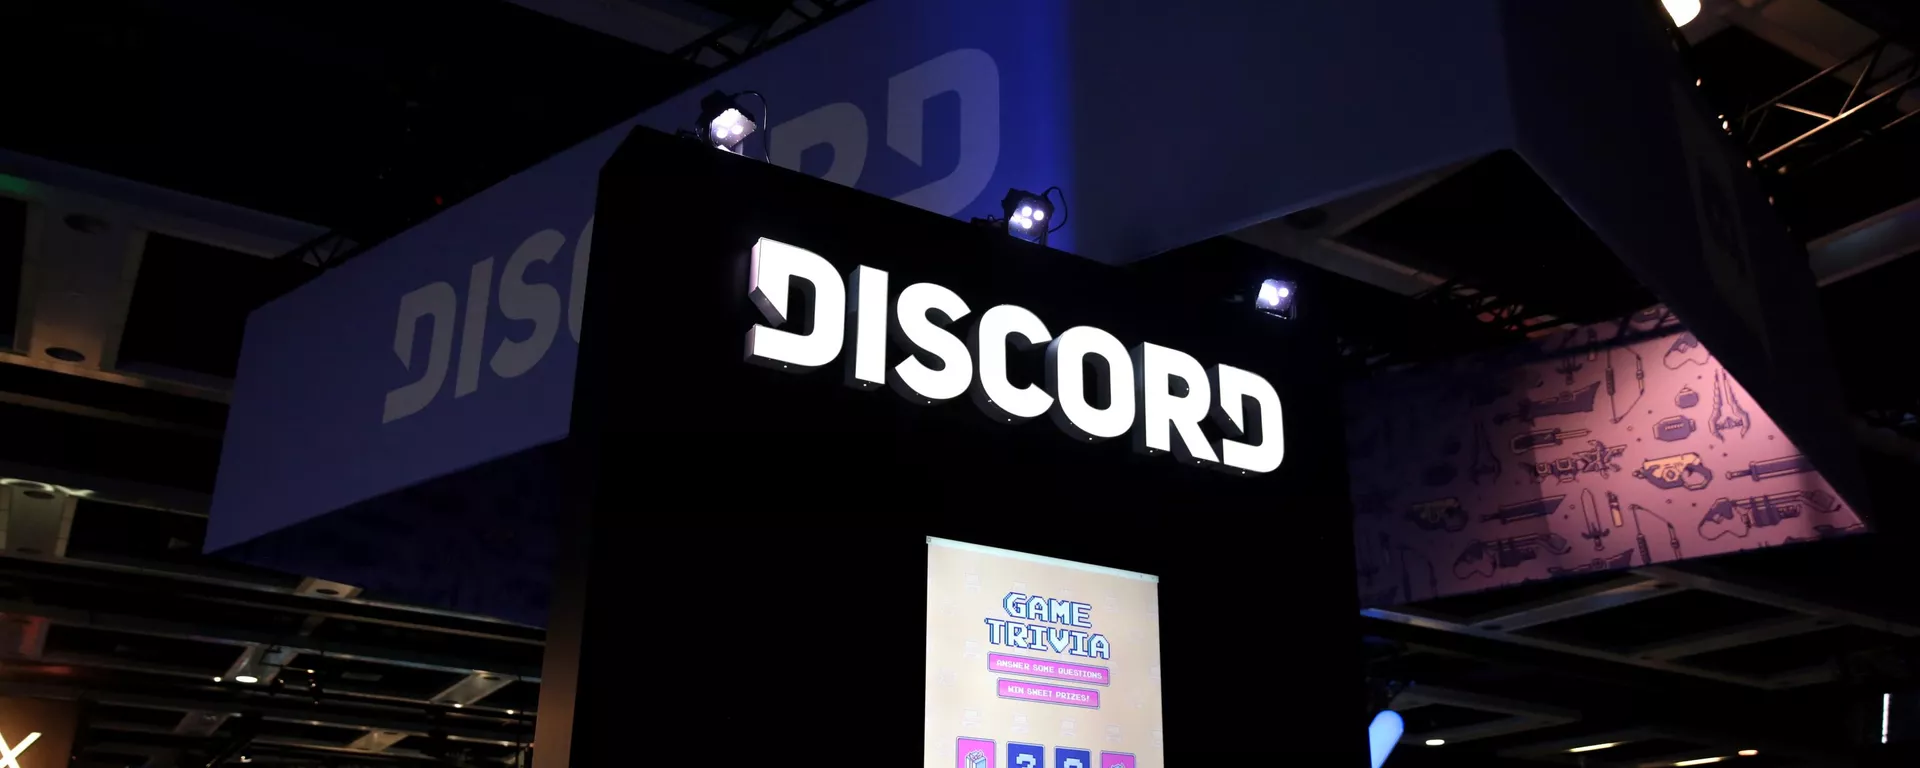 Discord booth at the 2018 PAX West at the Washington State Convention Center in Seattle, Washington. - Sputnik International, 1920, 14.04.2023